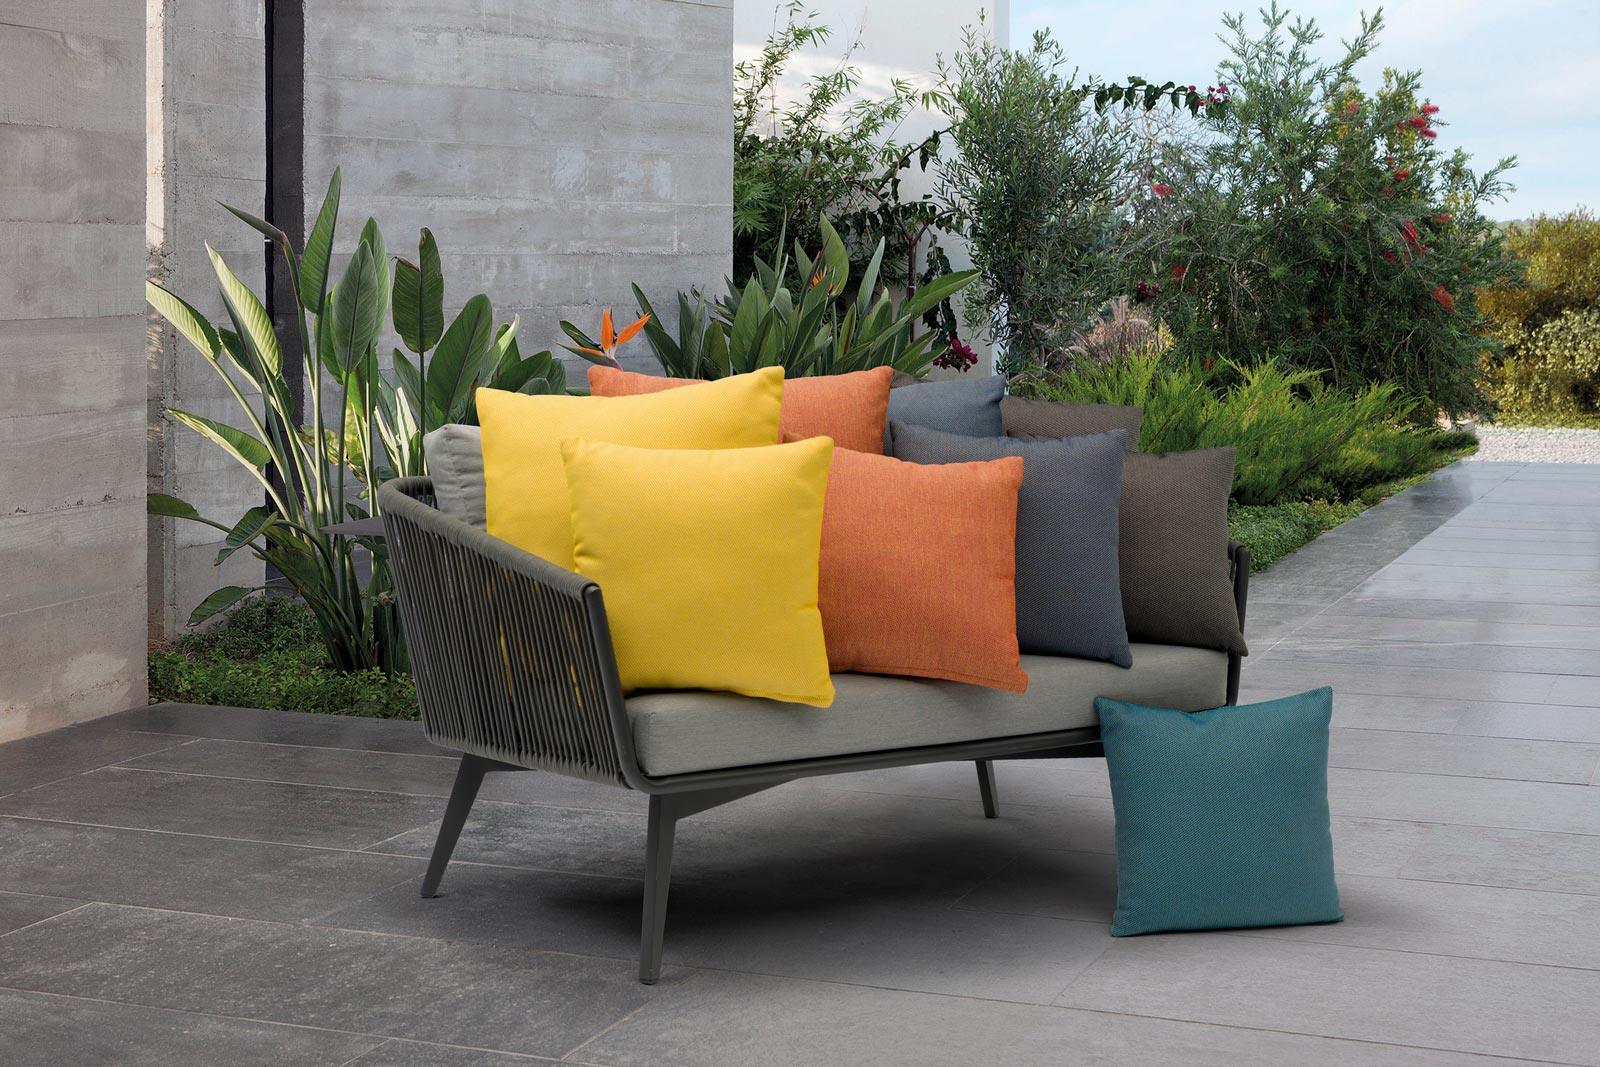 Creating a Modern Outdoor Space:Styling Outdoor Furniture to Match